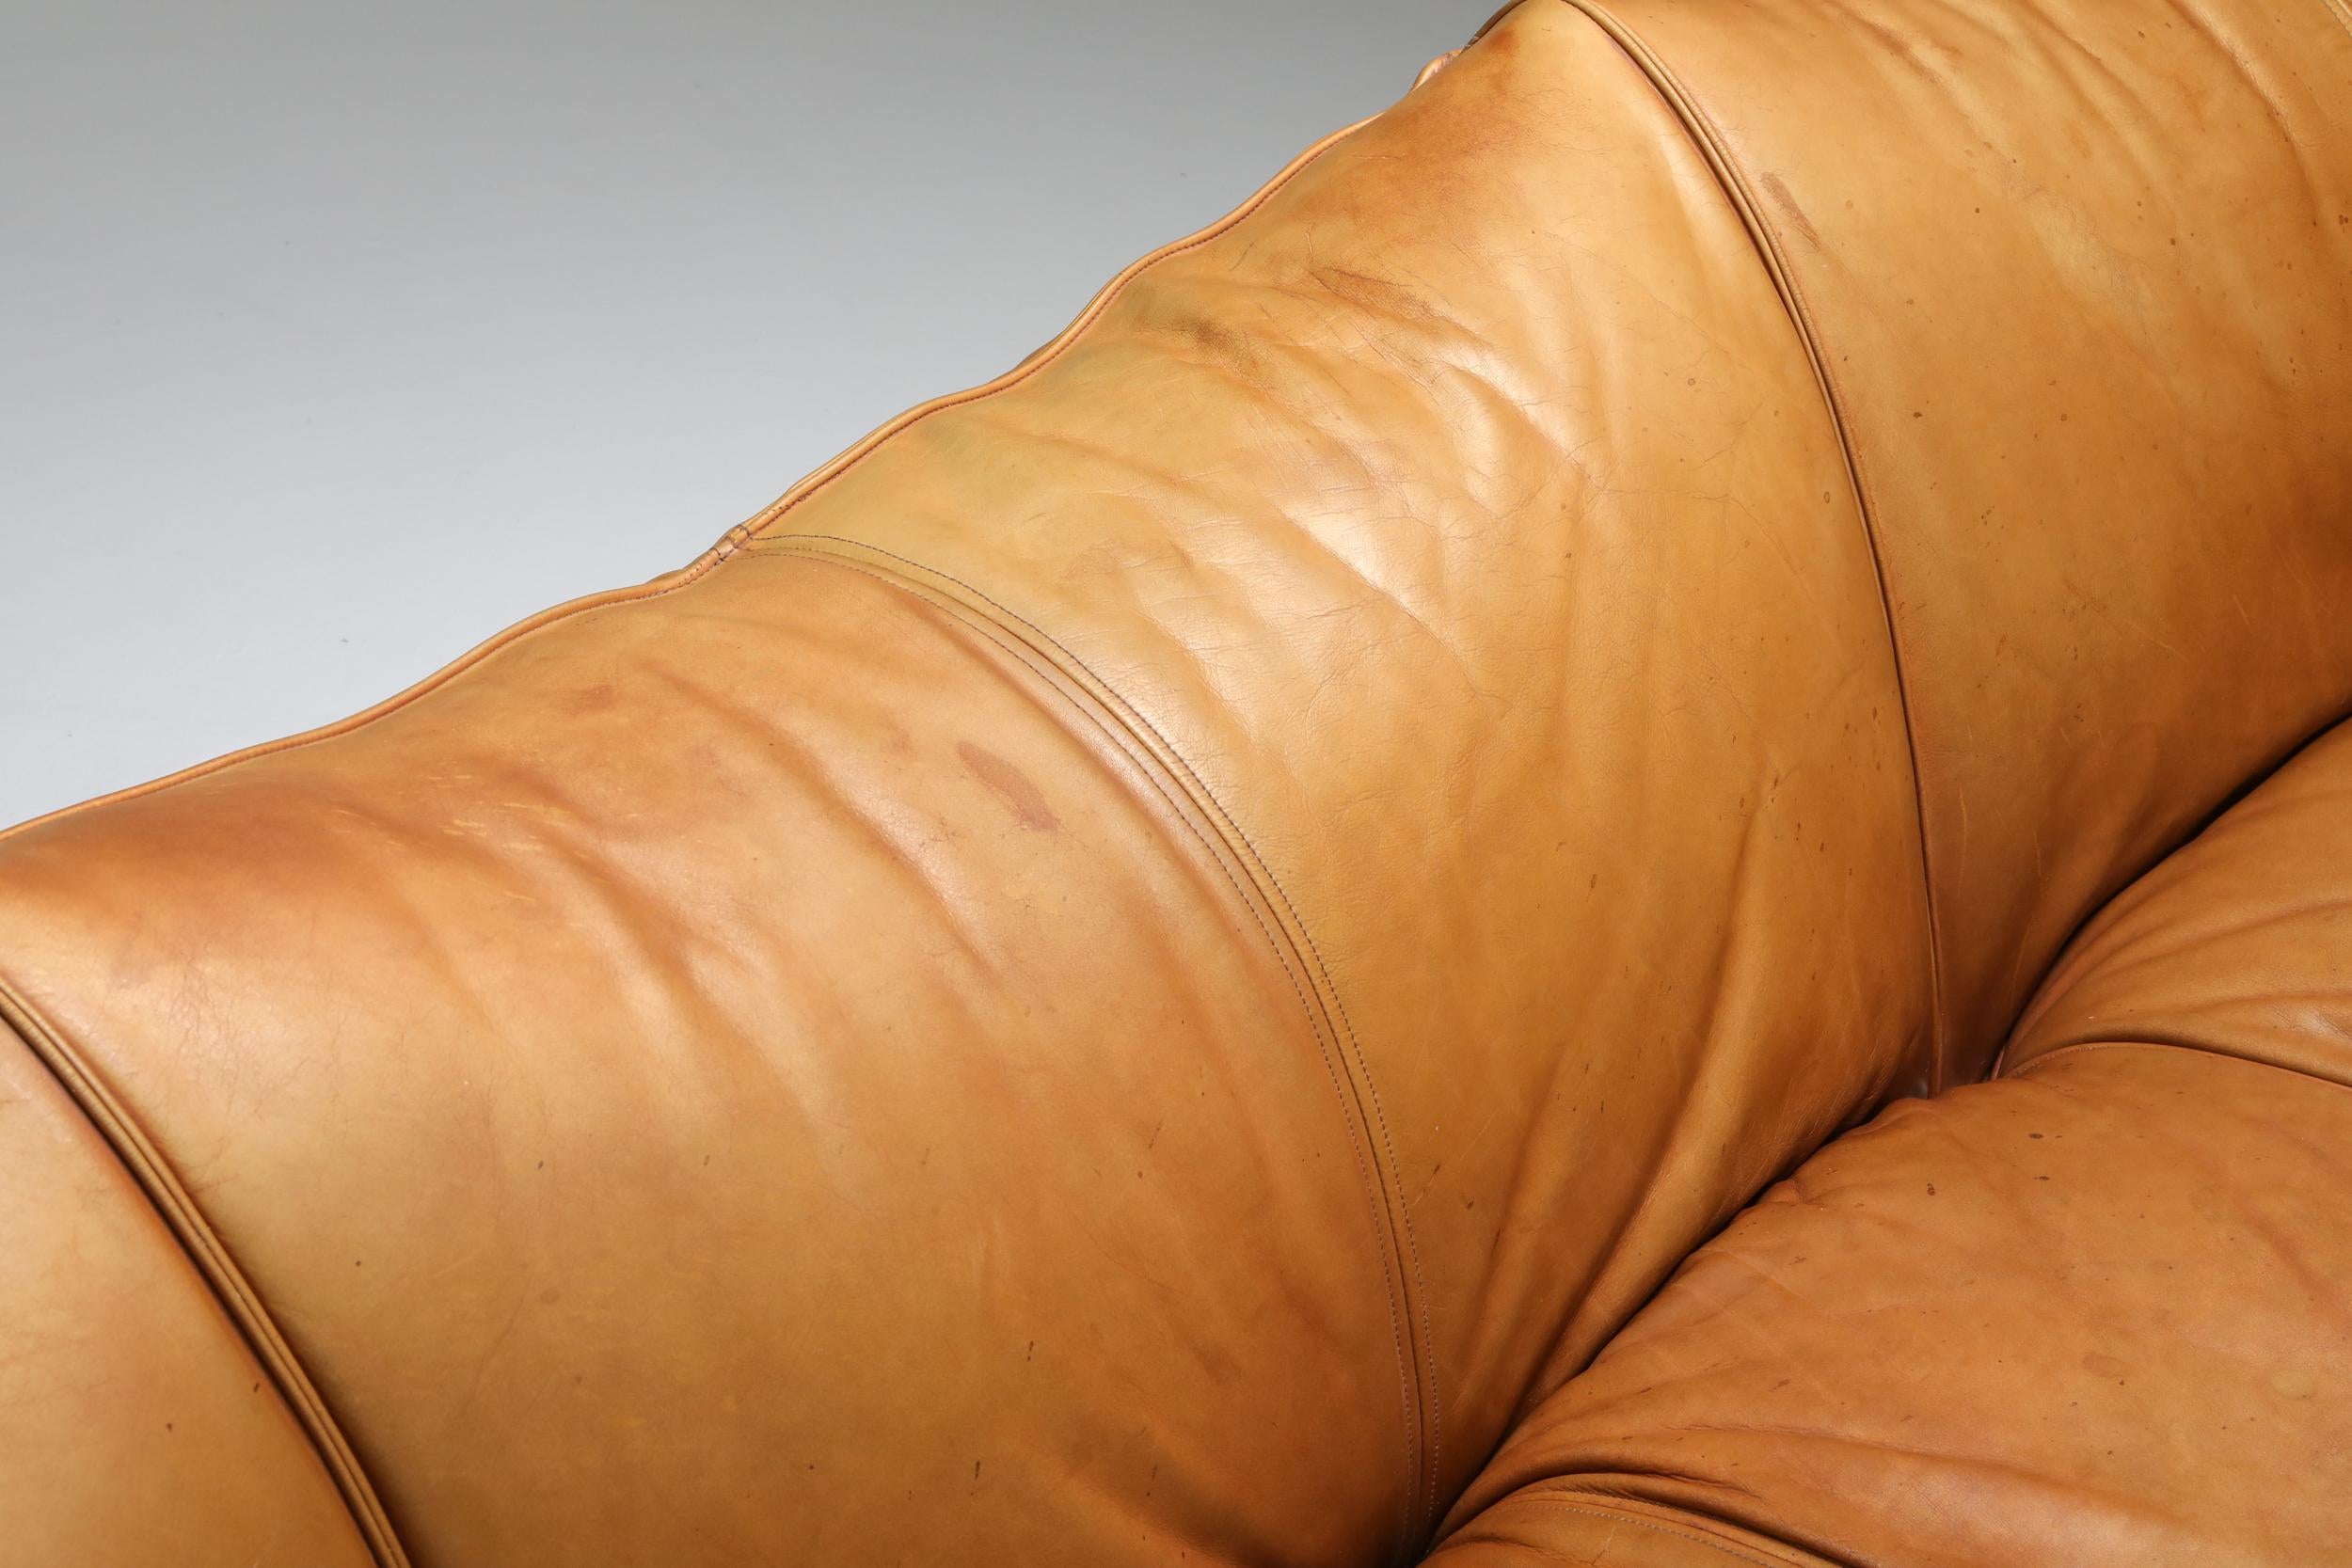 Upholstery Mario Bellini 'Le Bambole' Three-Seat Couch in Tan Leather